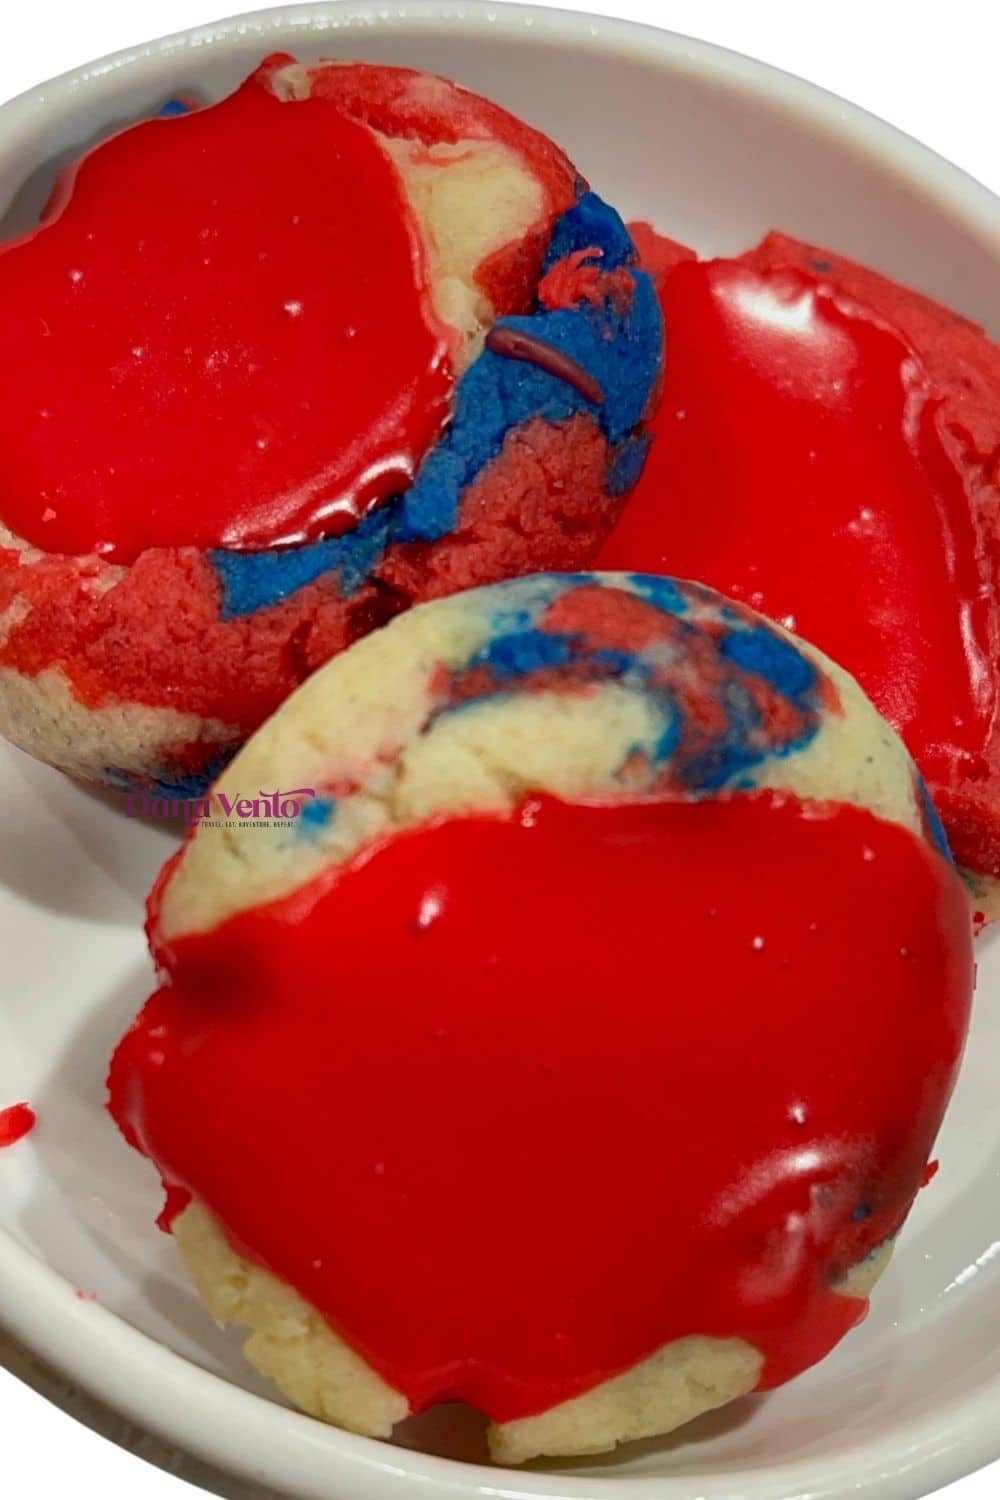 Mouthwatering patriotic red white blue thumbprint cookies showcasing festive colors of red, white, and blue